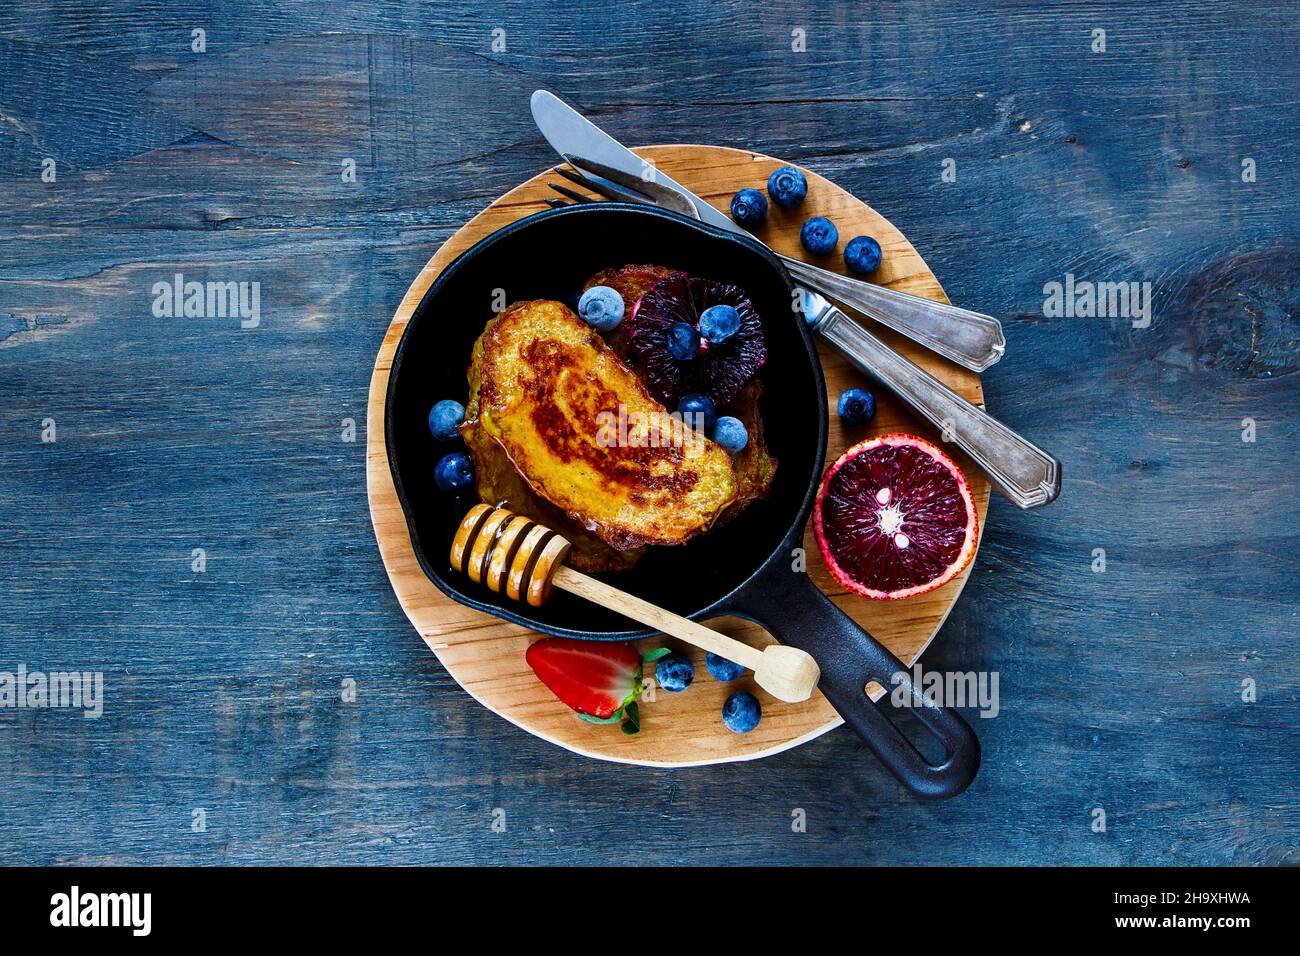 Homemade Cinnamon French Toasts with honey, berries and bloody orange in vintage cast iron pan for breakfast on rustic wooden background Stock Photo